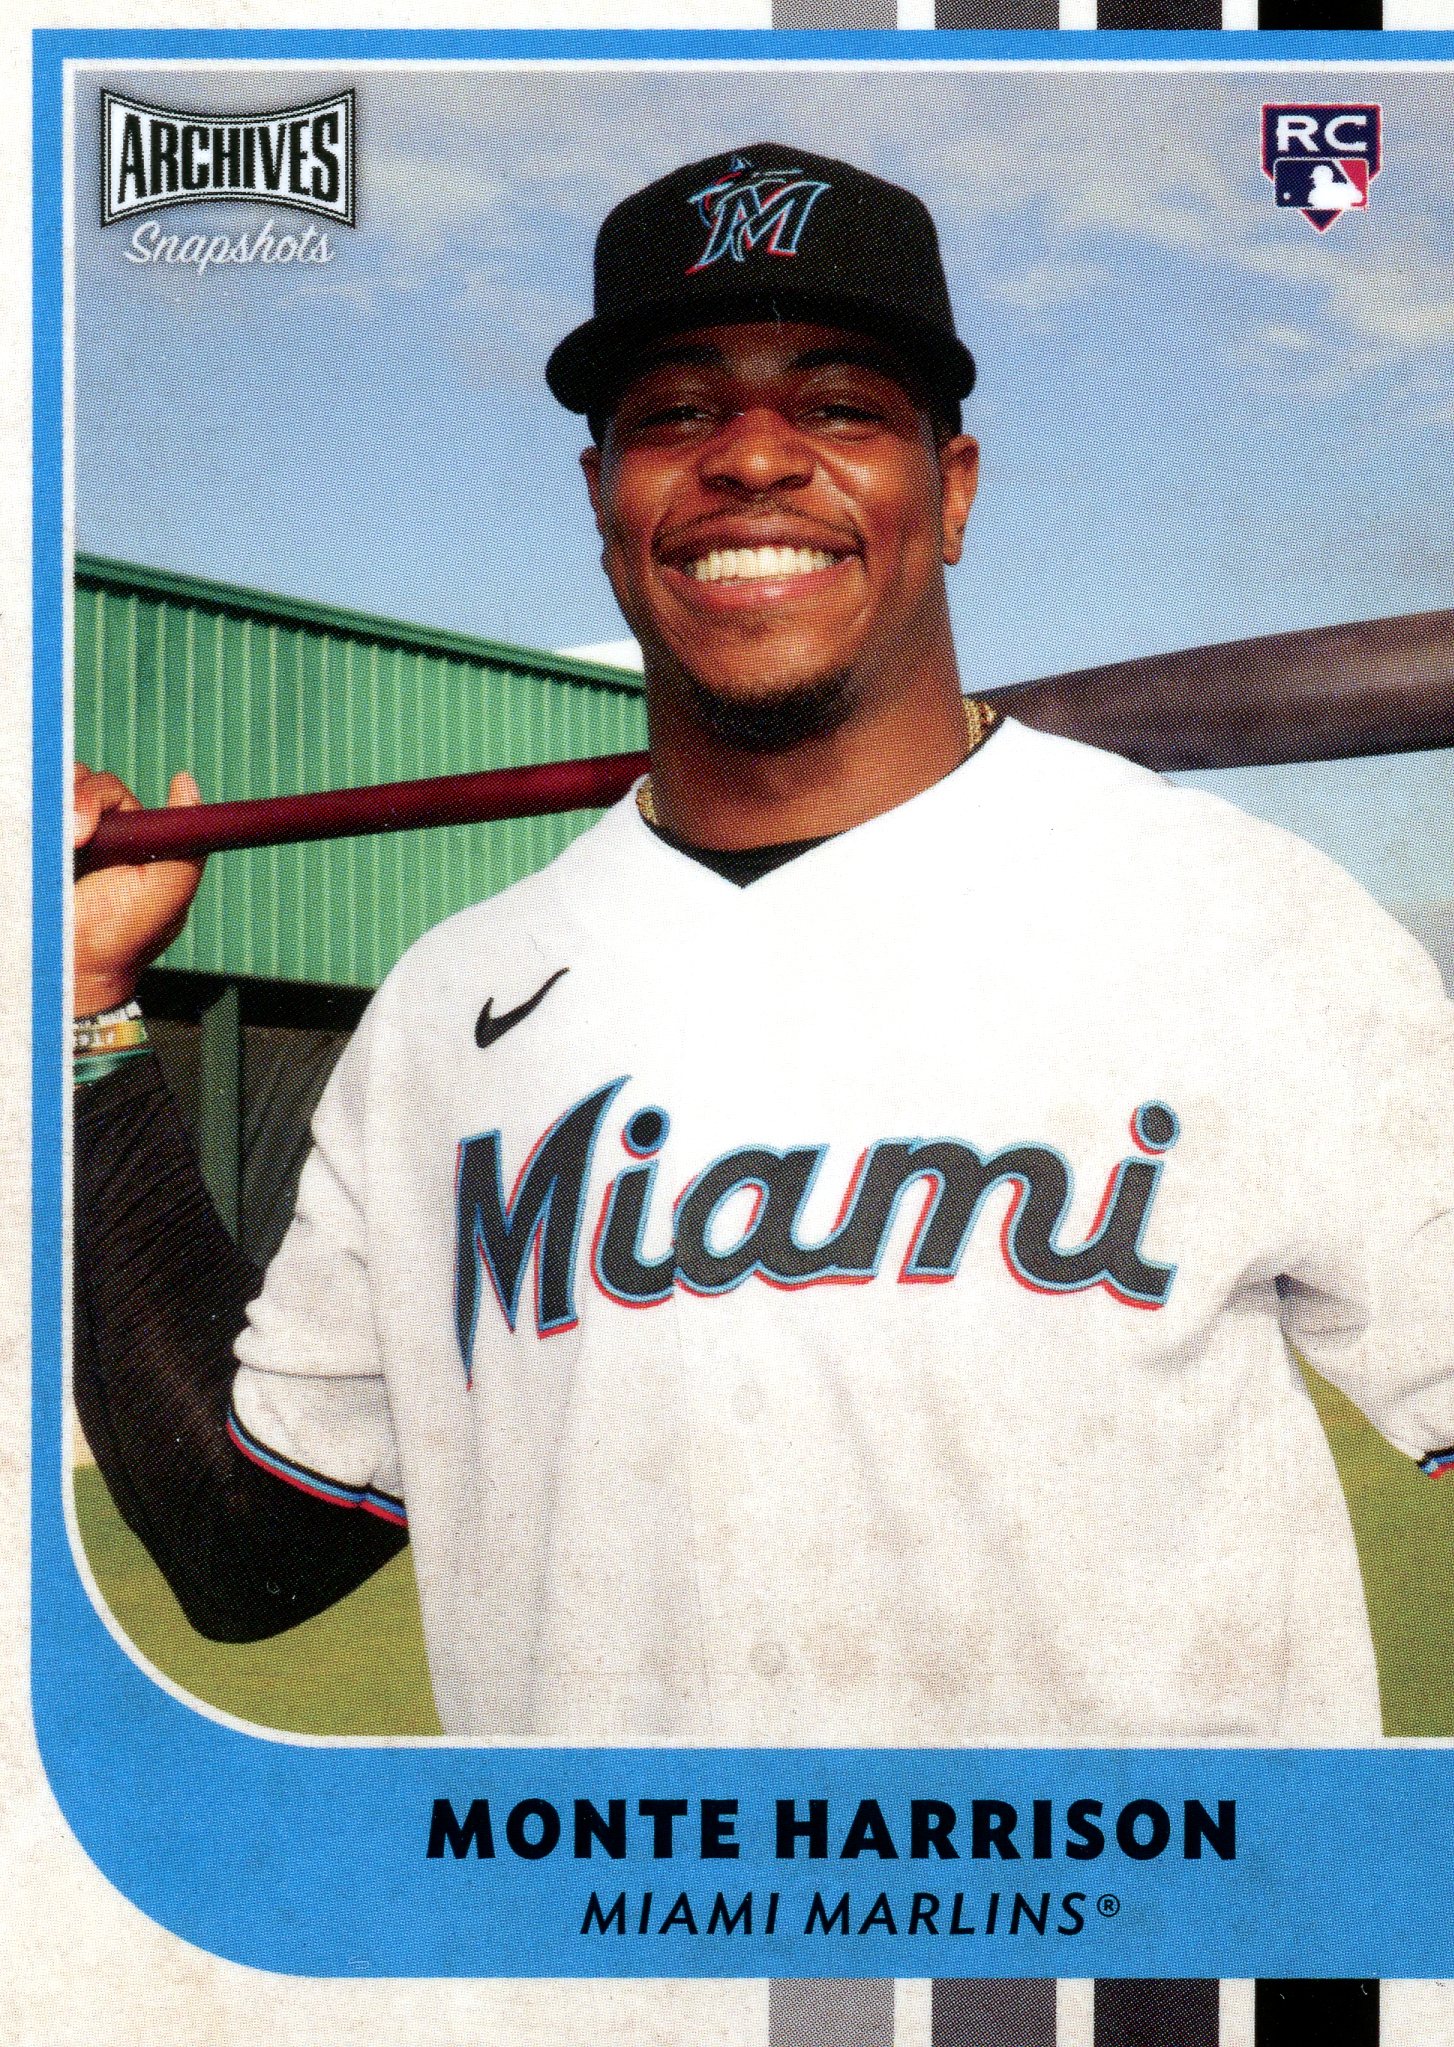 2021 Topps Archives Snapshots #26 Monte Harrison RC